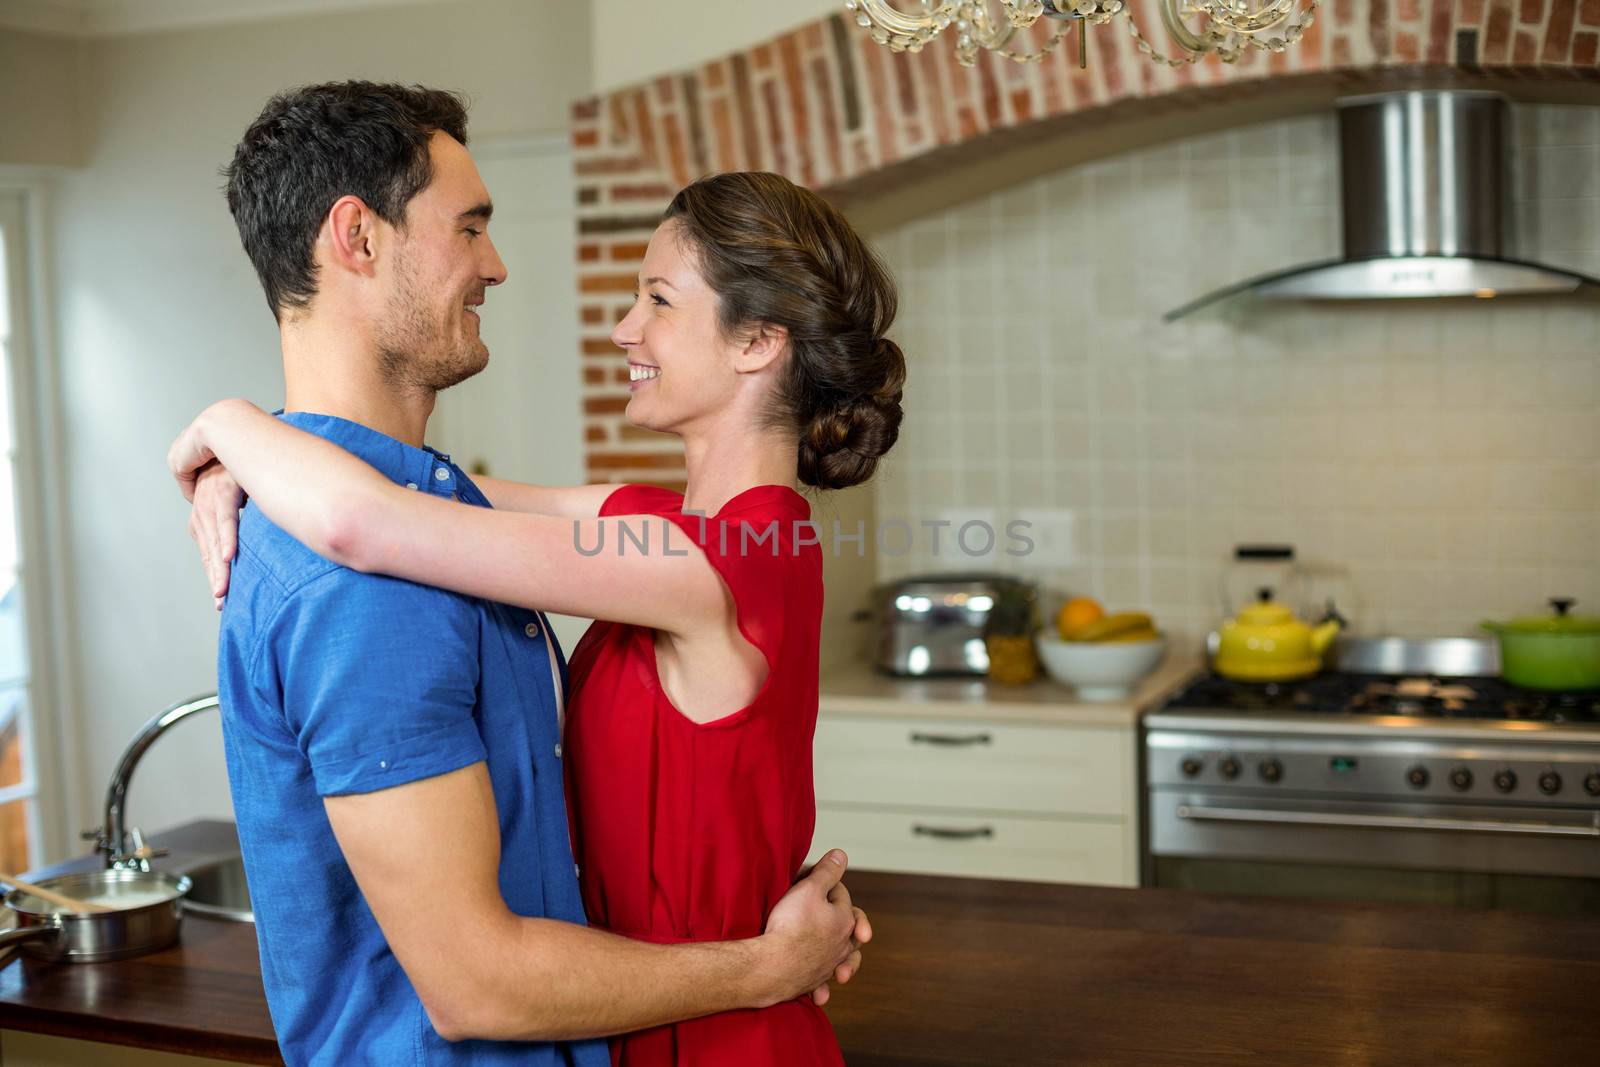 Romantic couple standing face to face and embracing each other in kitchen